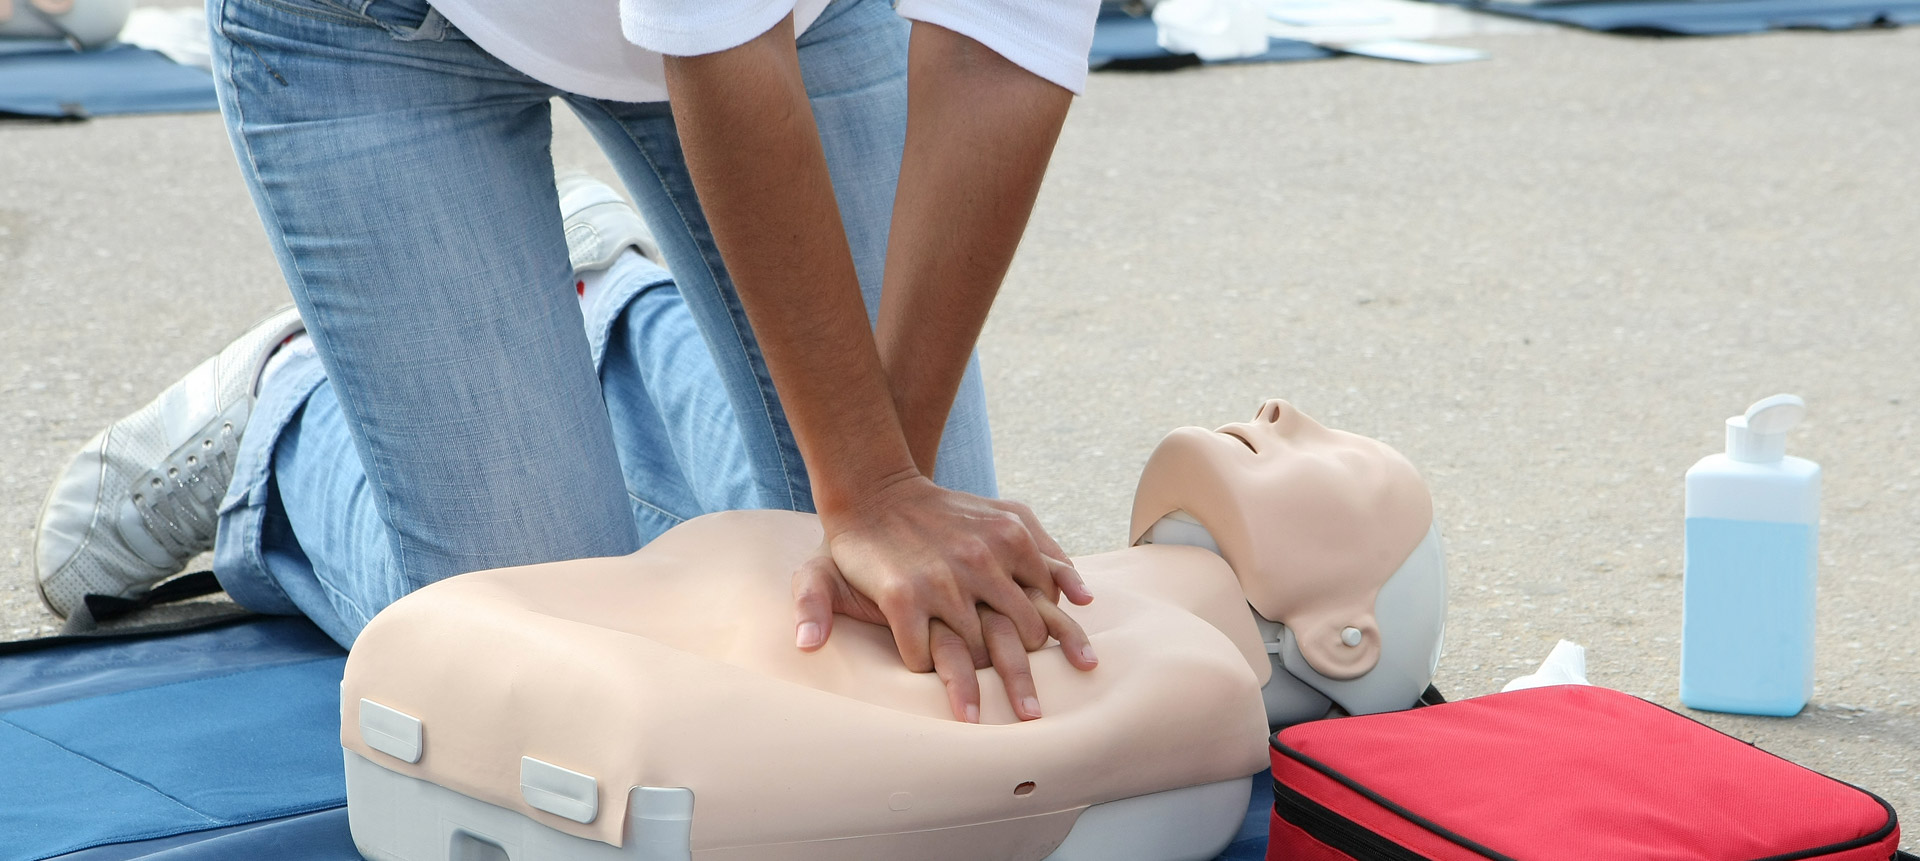 CPR training | Heart and Stroke Foundation